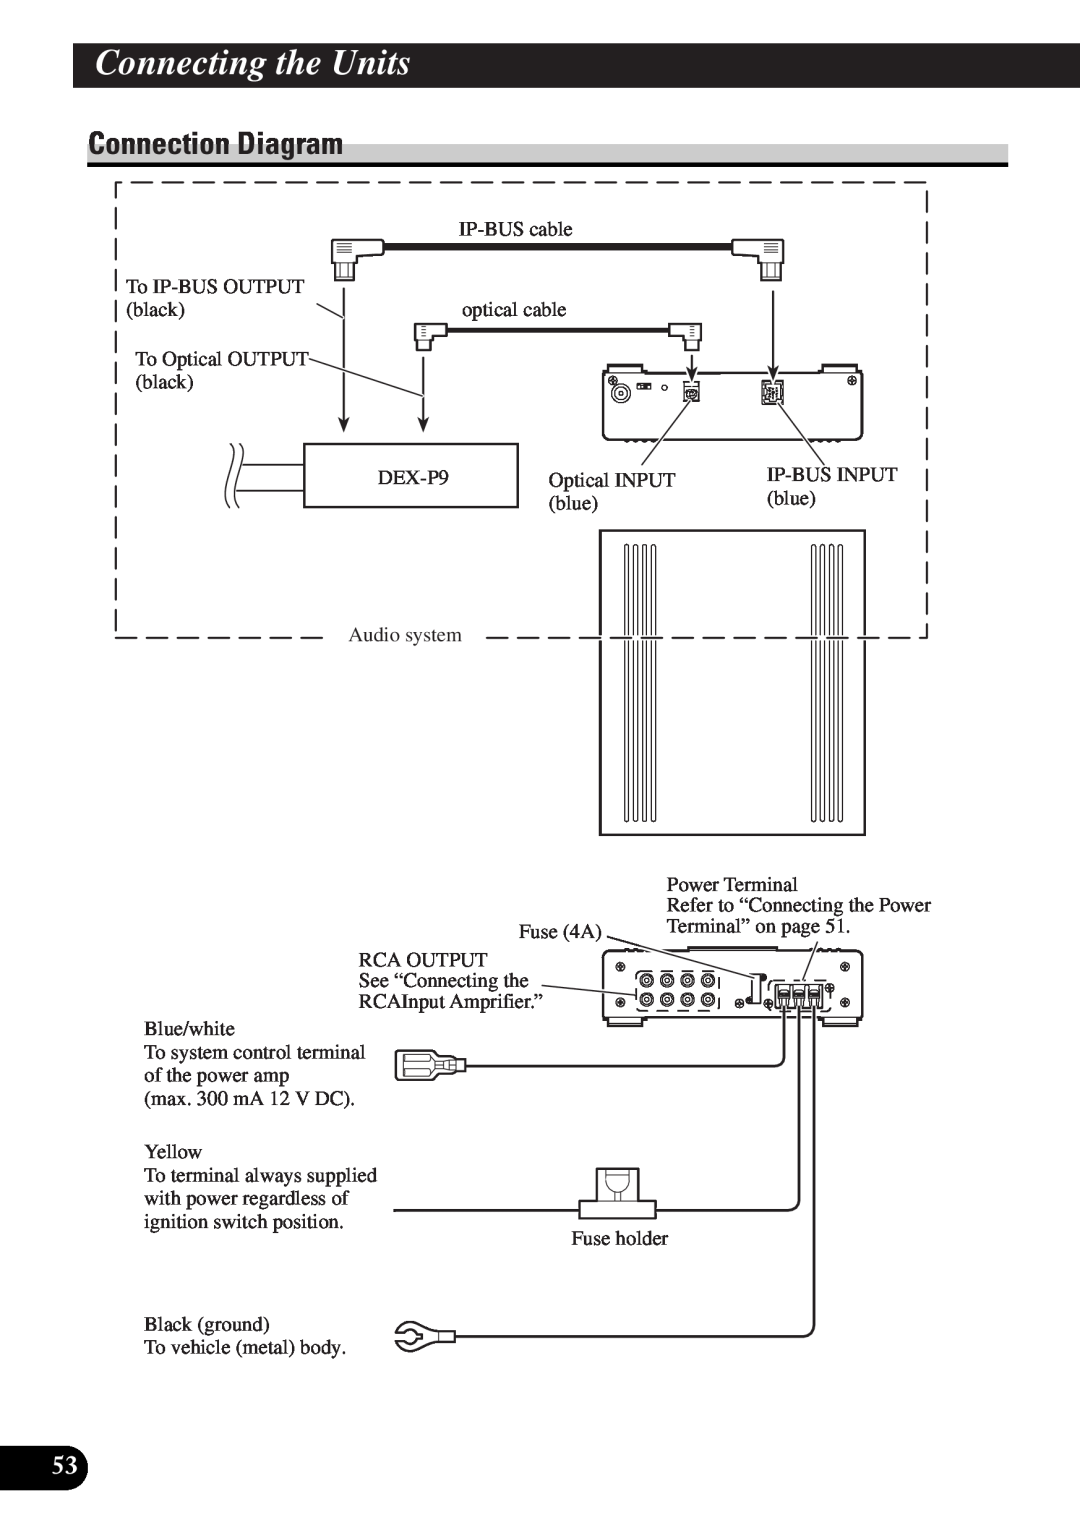 Pioneer DEQ-P9 owner manual Connection Diagram, Connecting the Units 